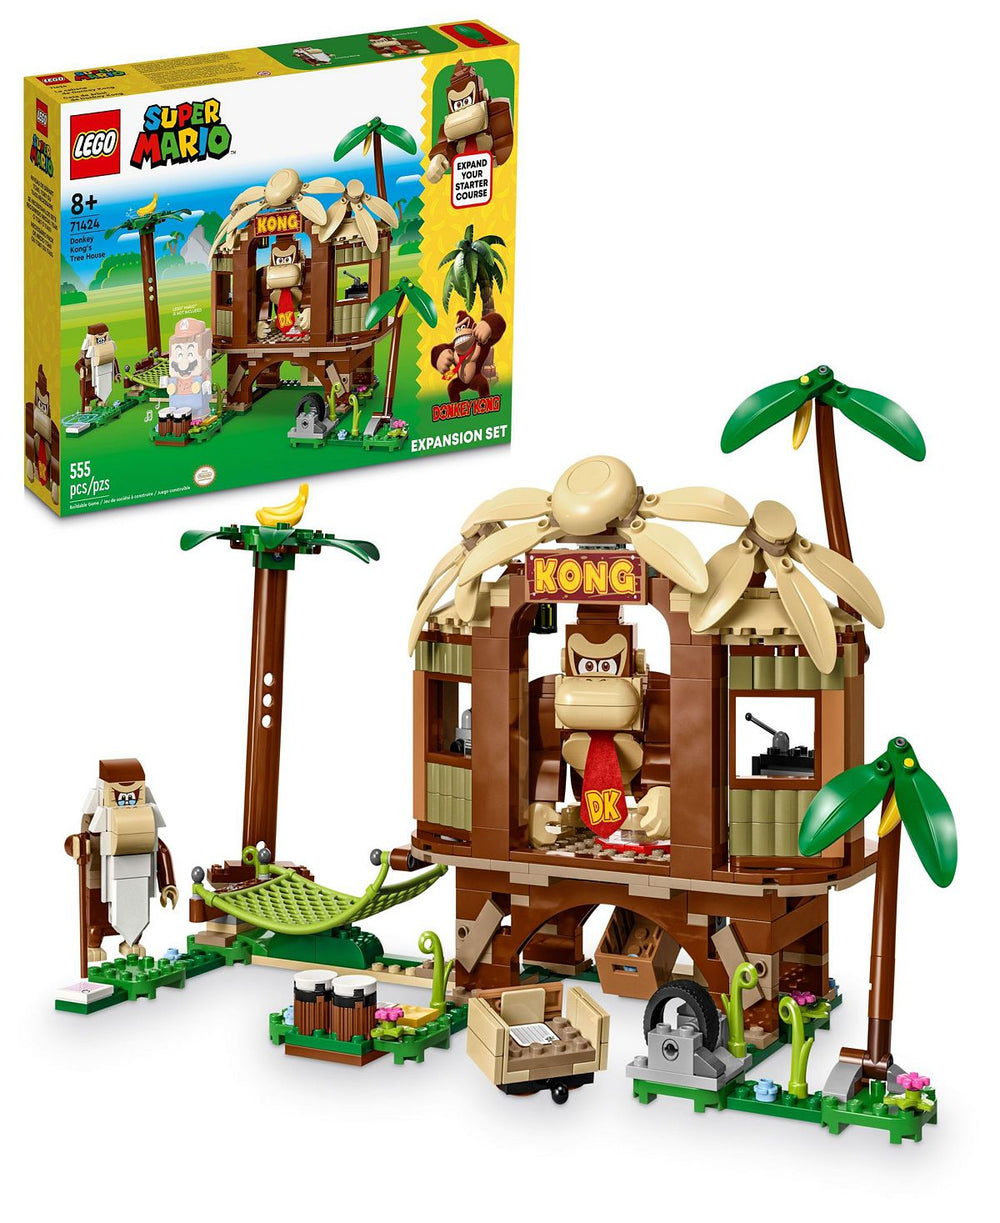 LEGO® Super Mario 71424 Donkey Kong's Tree House Expansion Toy Building Set with Donkey Kong & Cranky Kong Minifigures